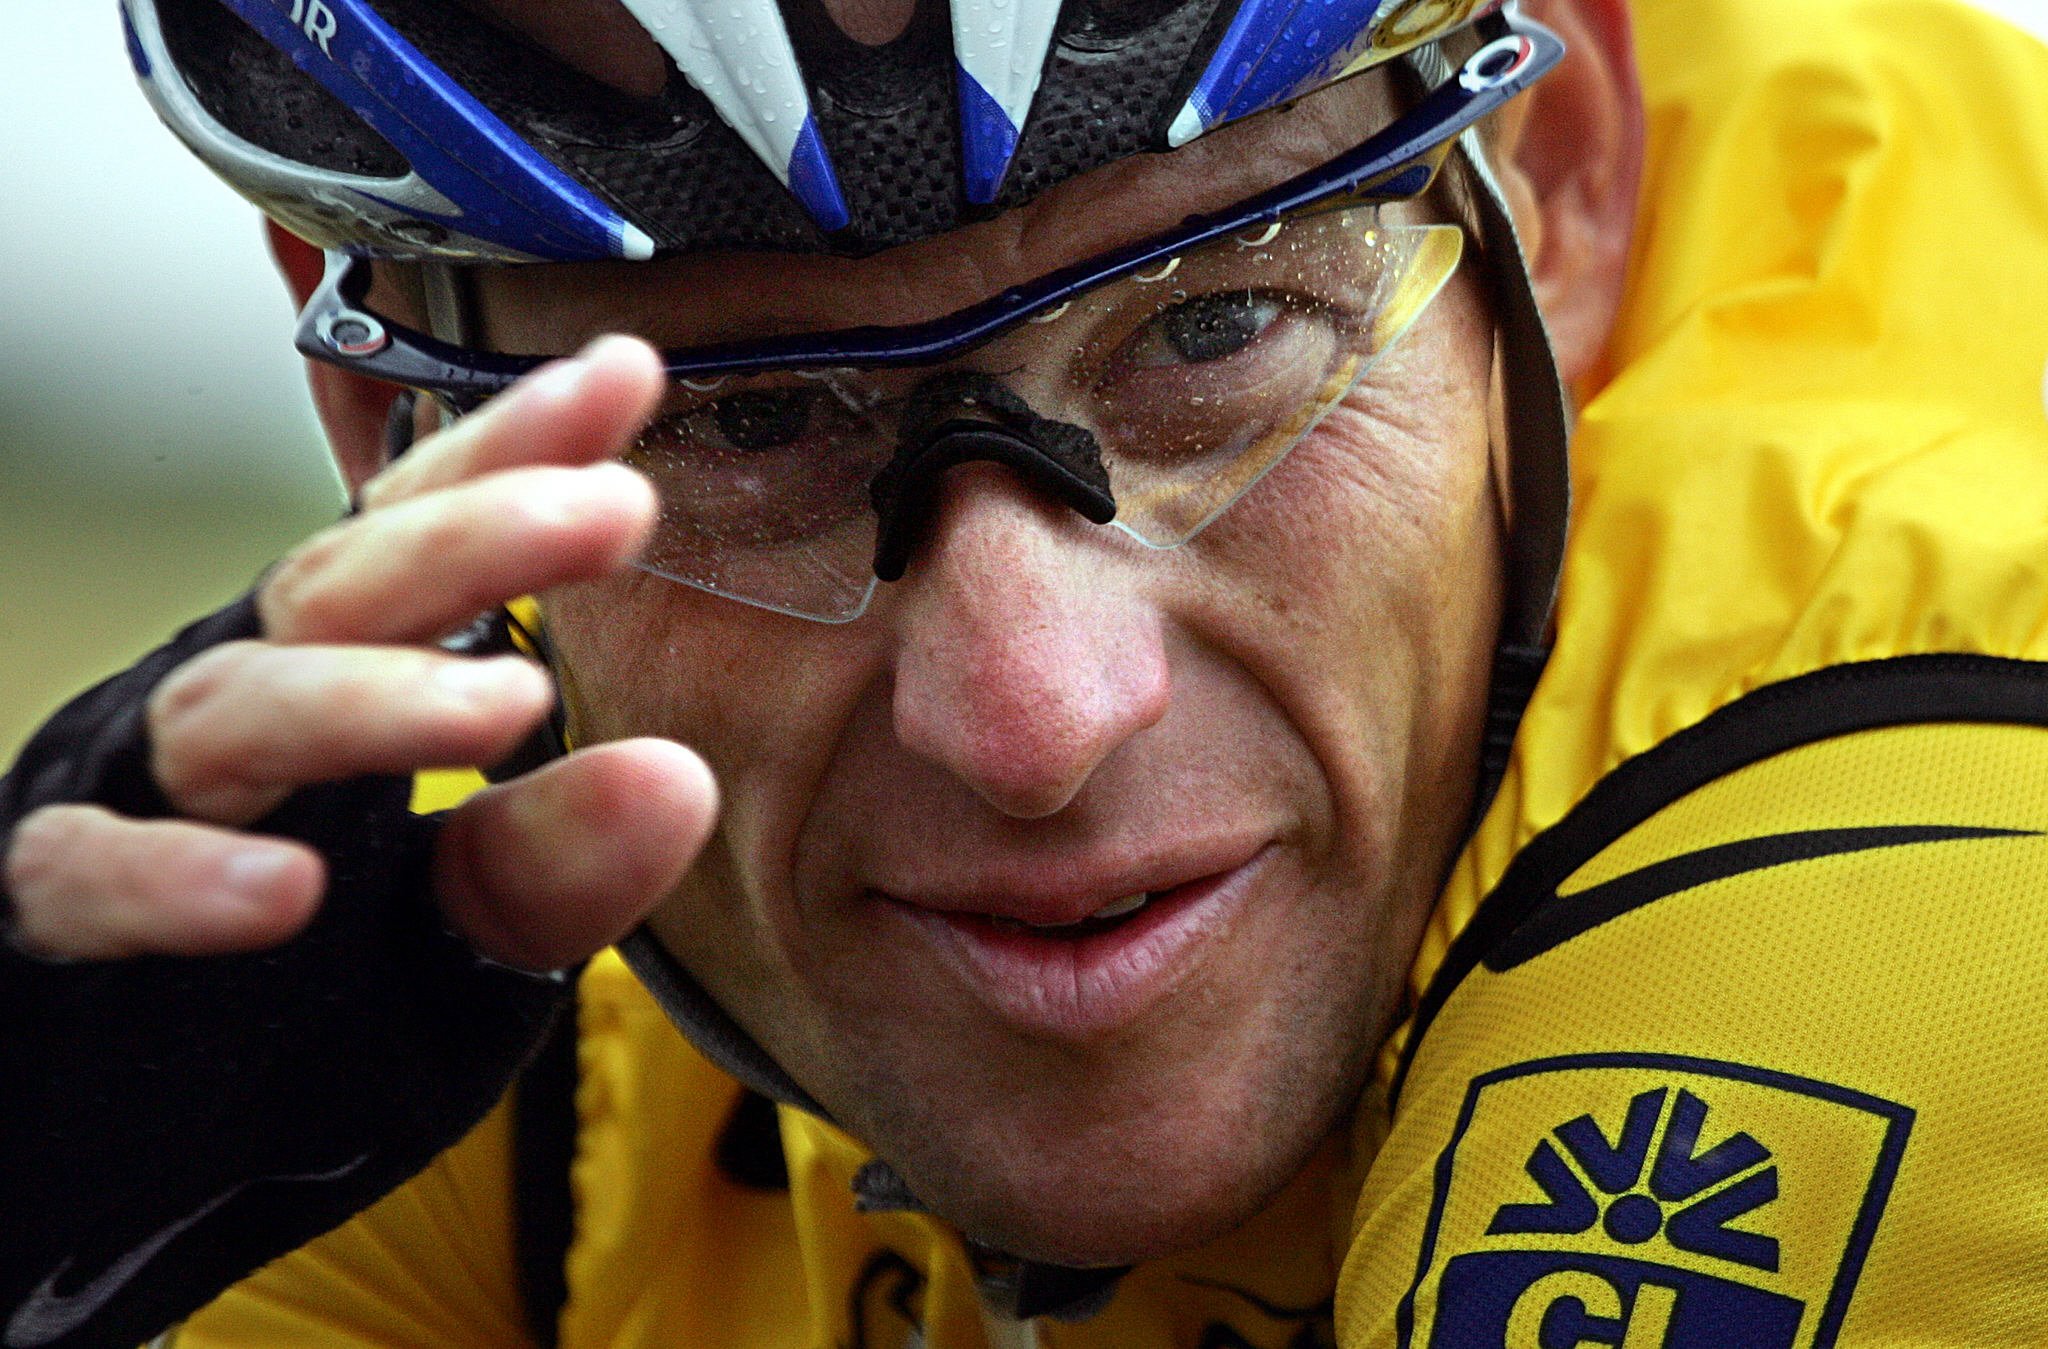 Lance Armstrong testified against former teammate Frankie Andreu in an ongoing lawsuit. Photo: 